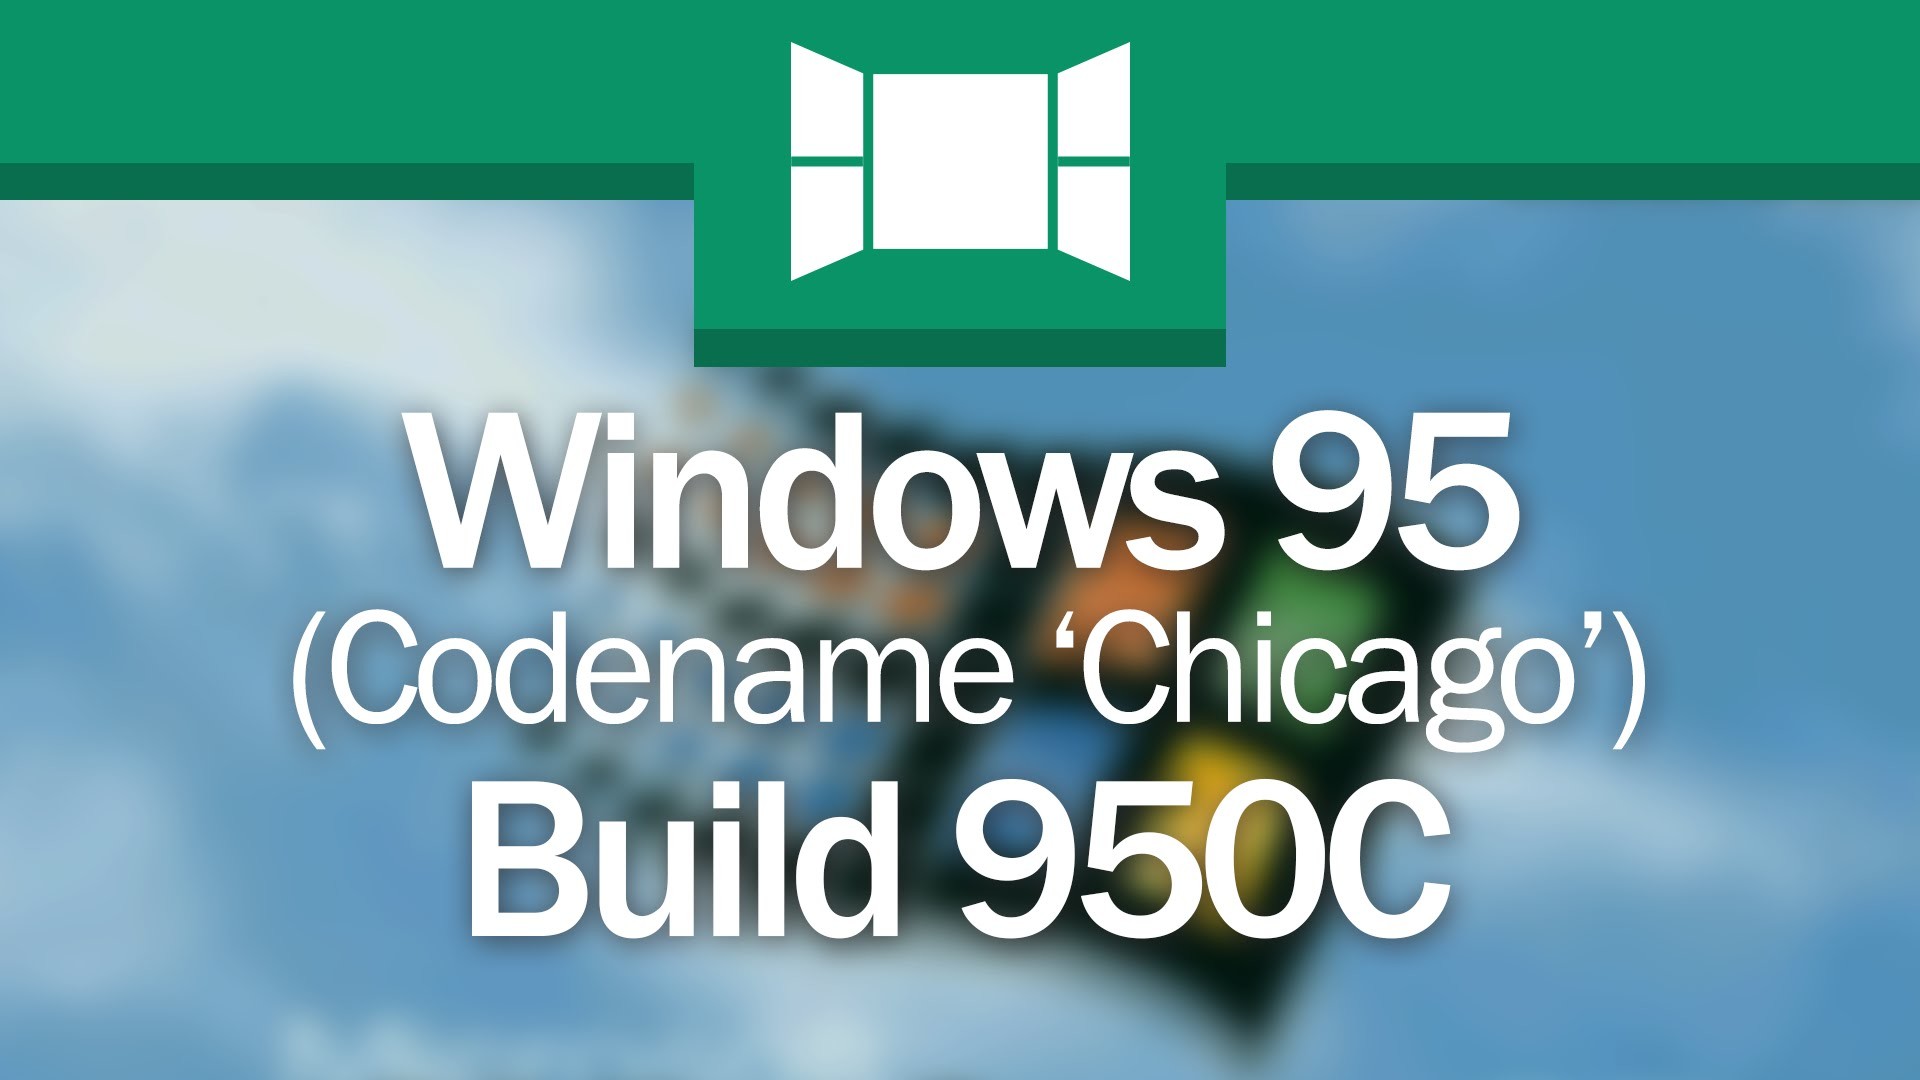 1920x1080 Windows 95 Build 950C: "95 As You'd Find It Today"